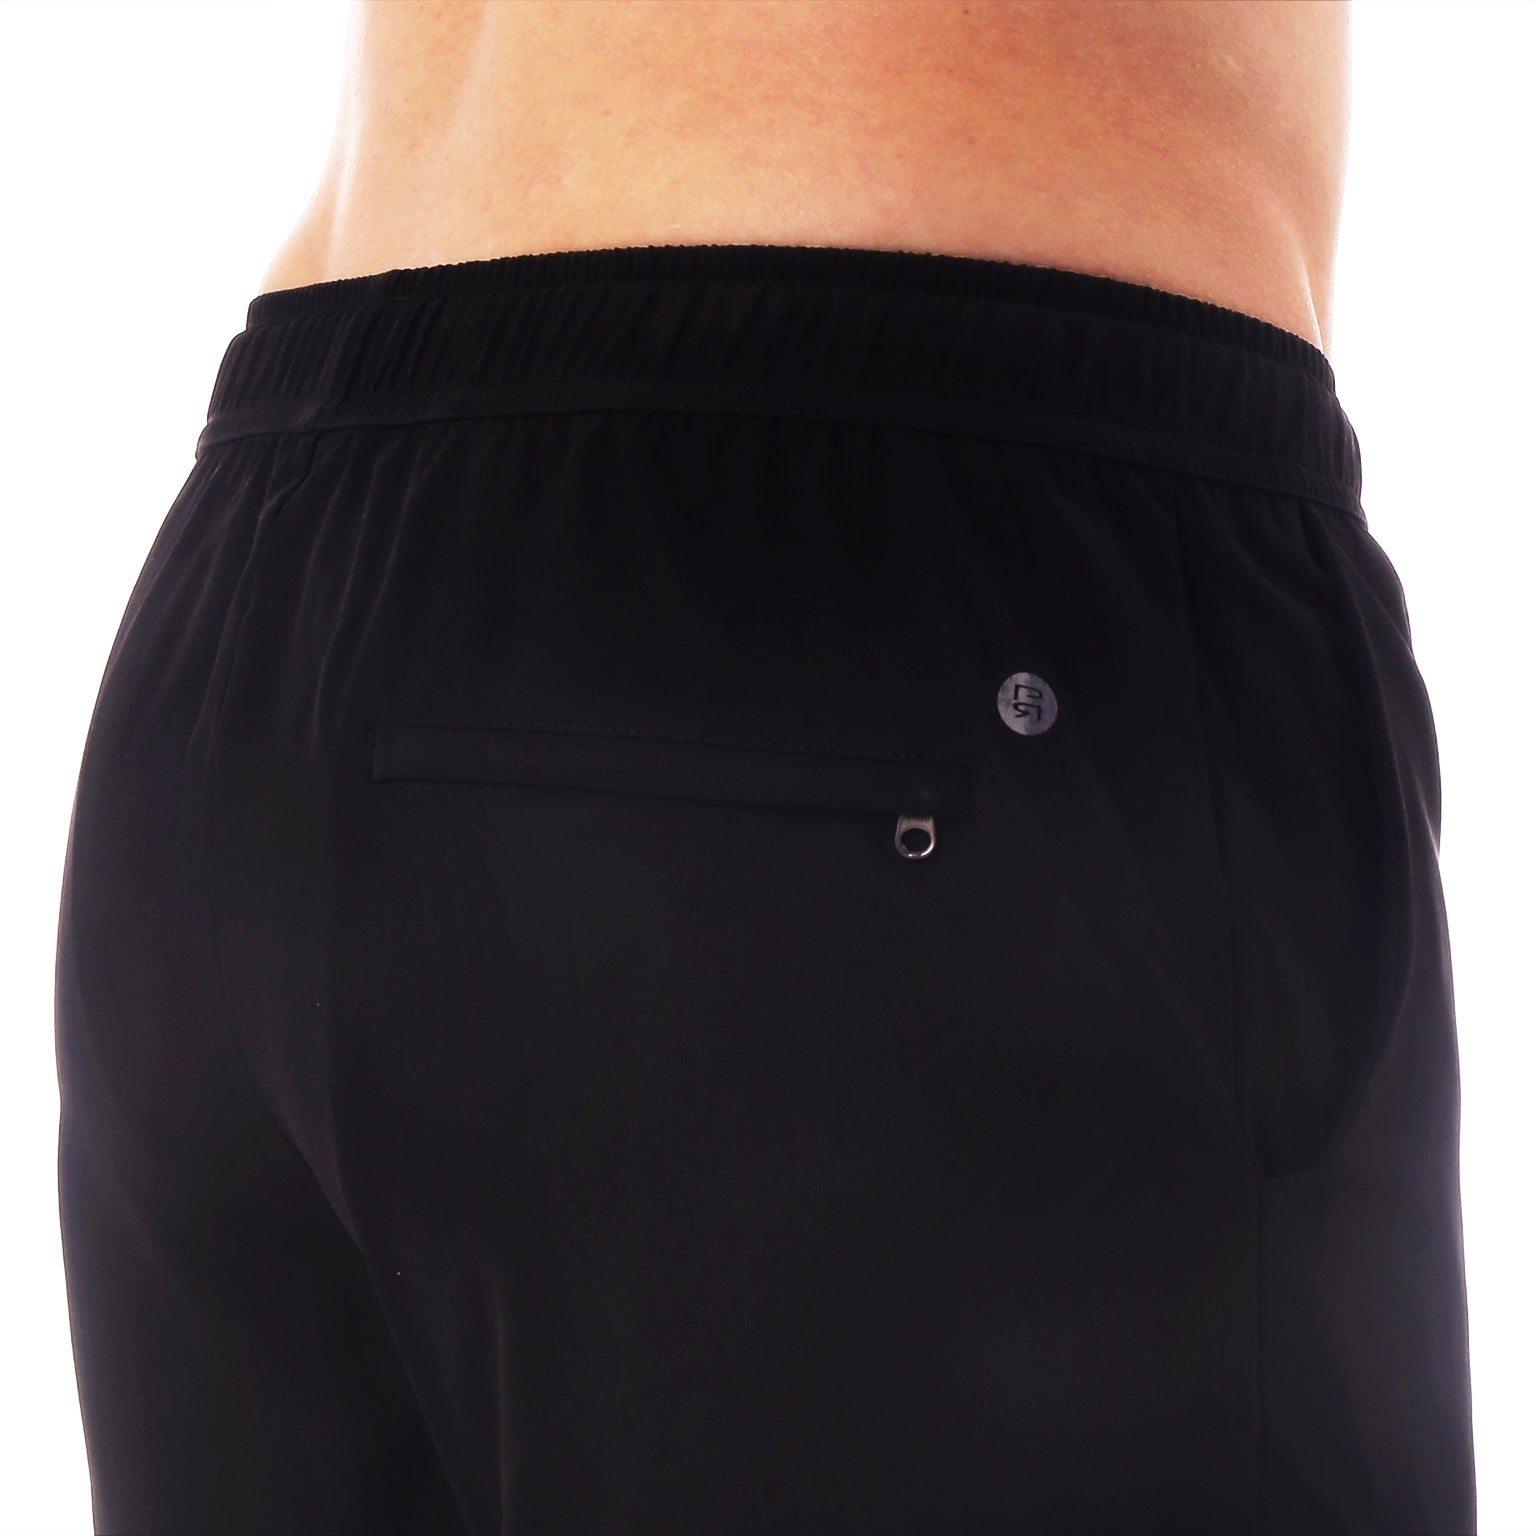 ACTIONWEAR- Black Solid Stretch Knockout Boxer Short